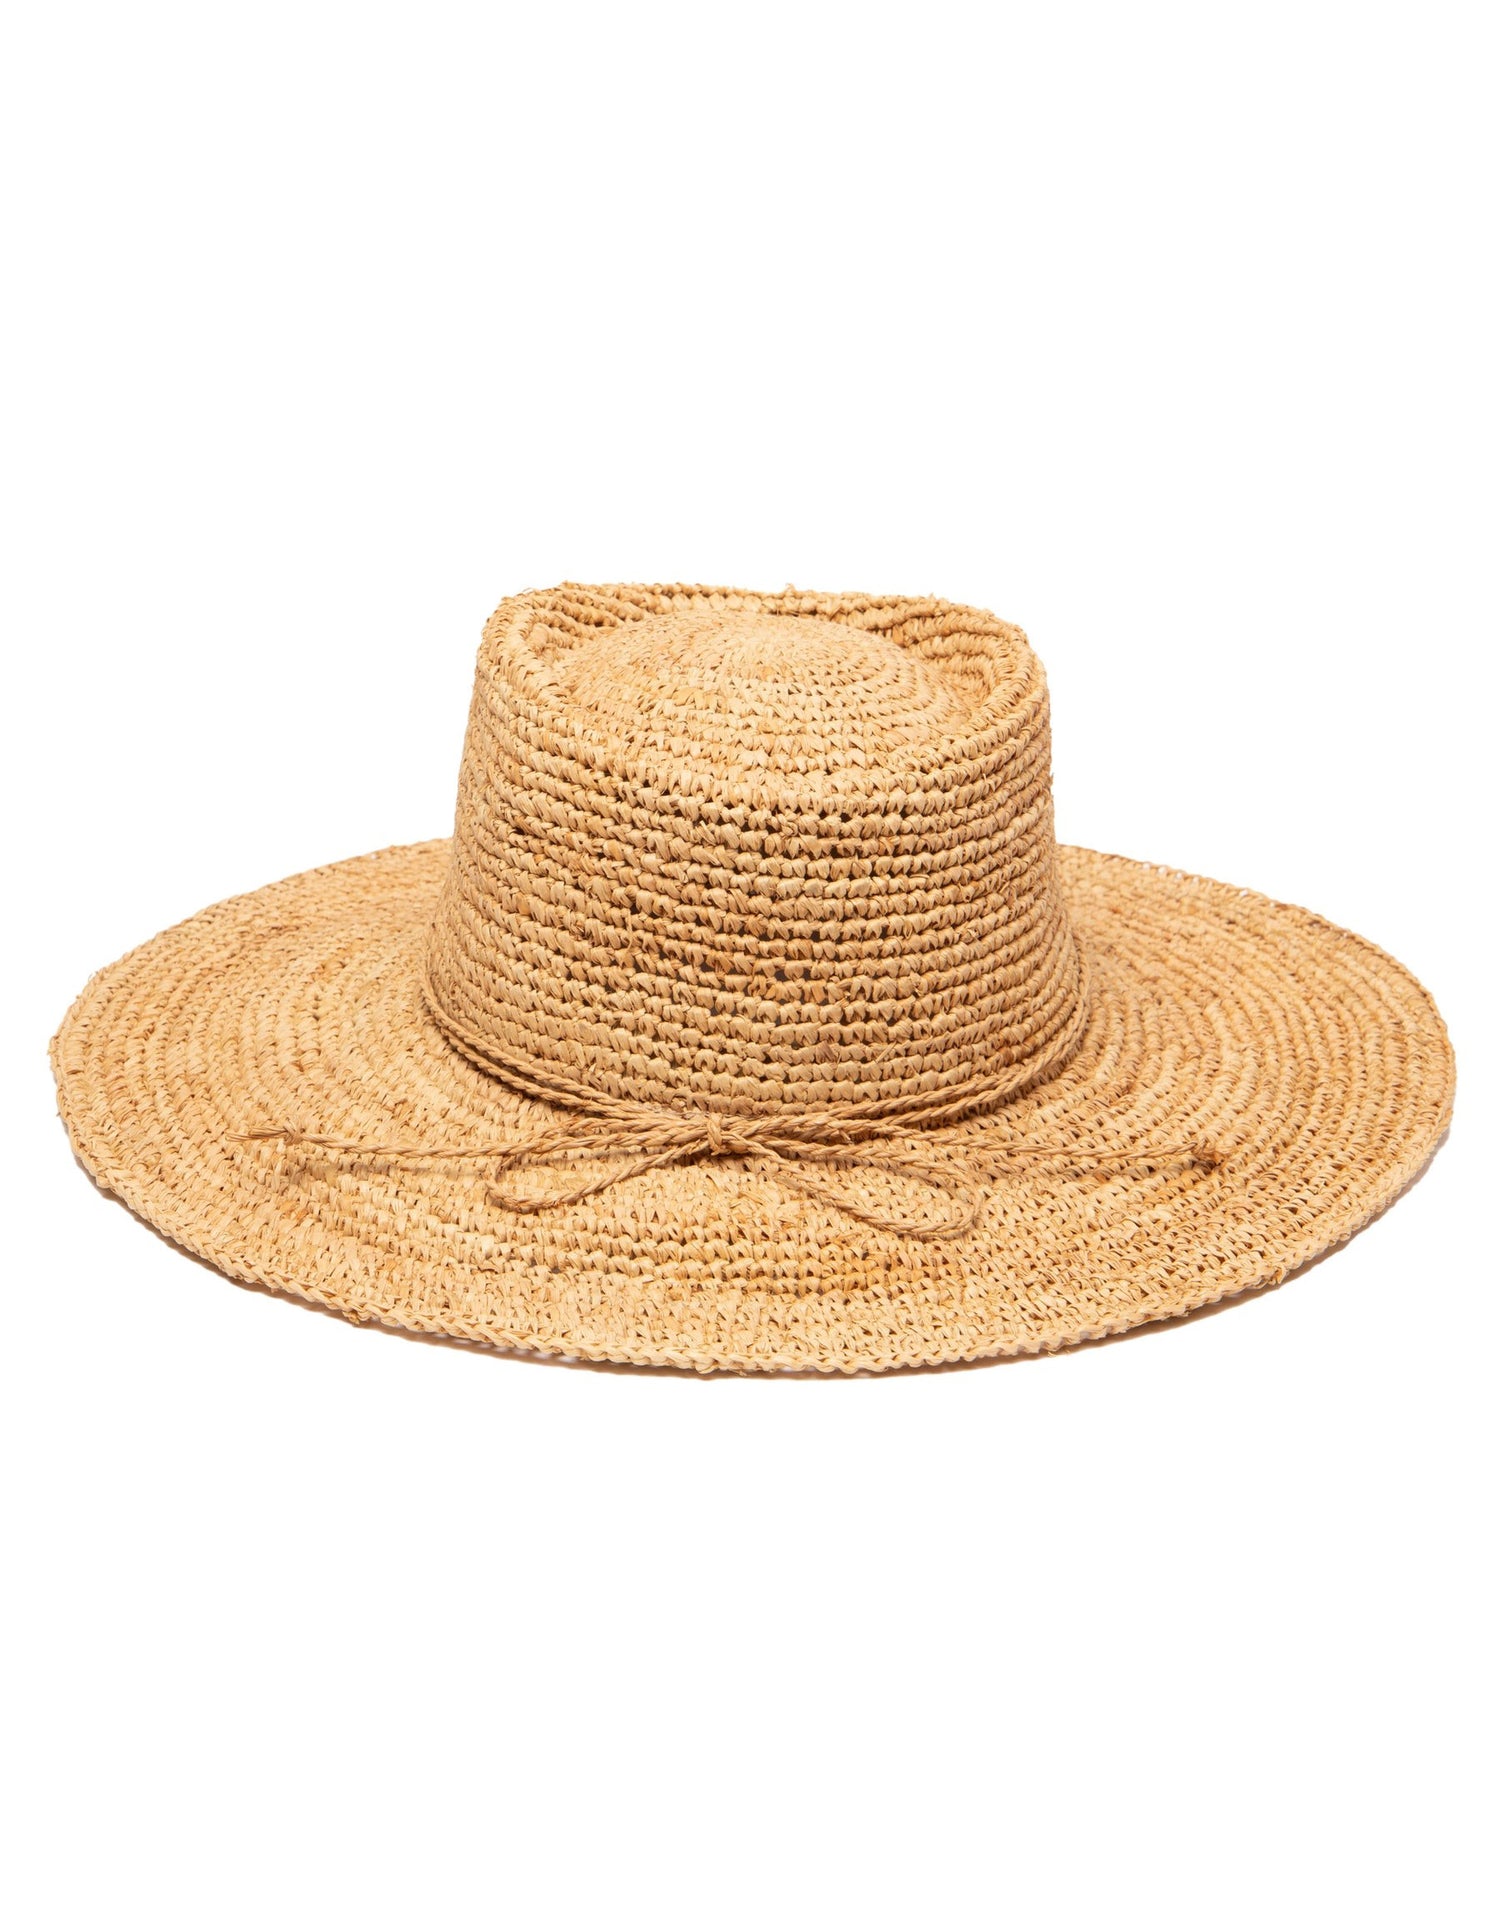 Oval Crown Raffia Hat by San Diego Hat Company in Natural - Back View